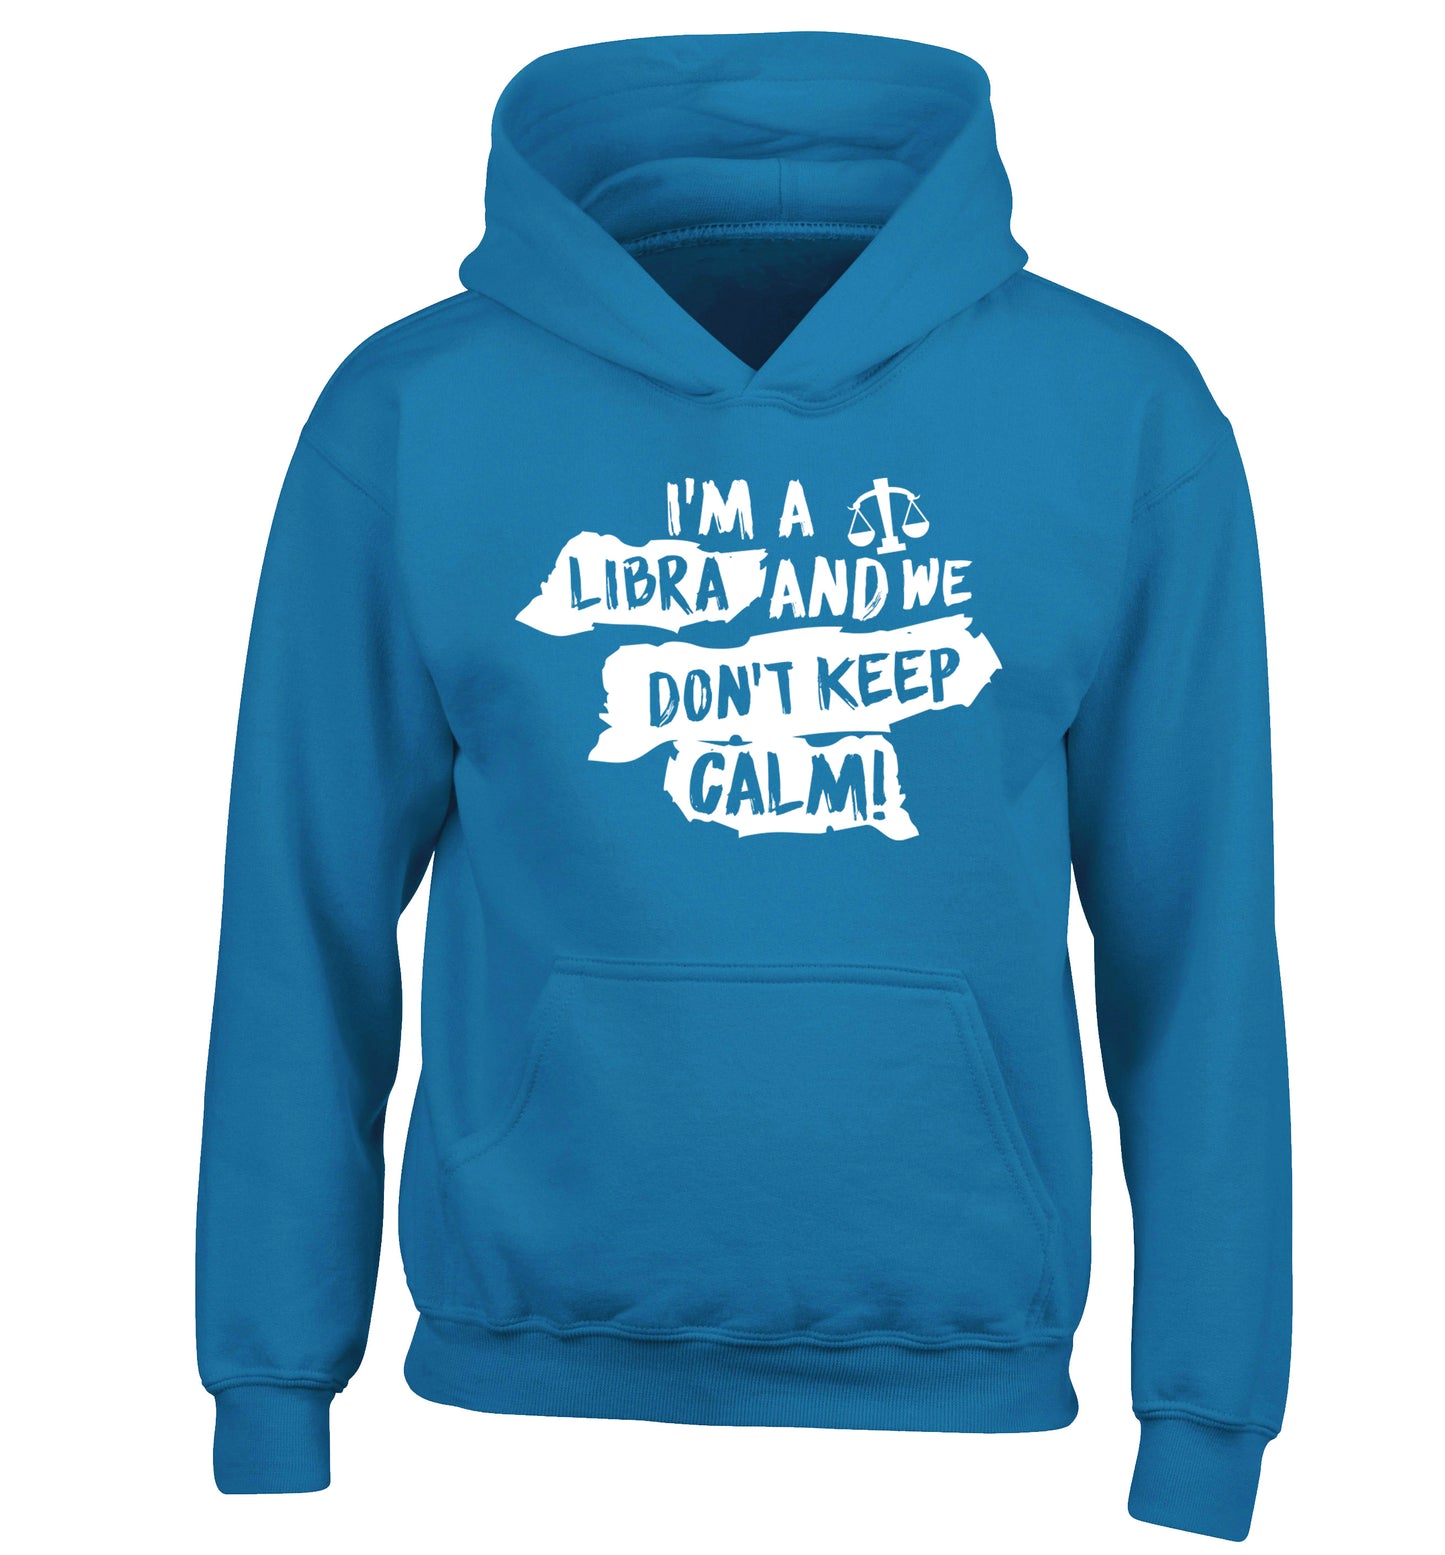 I'm a libra and we don't keep calm children's blue hoodie 12-13 Years